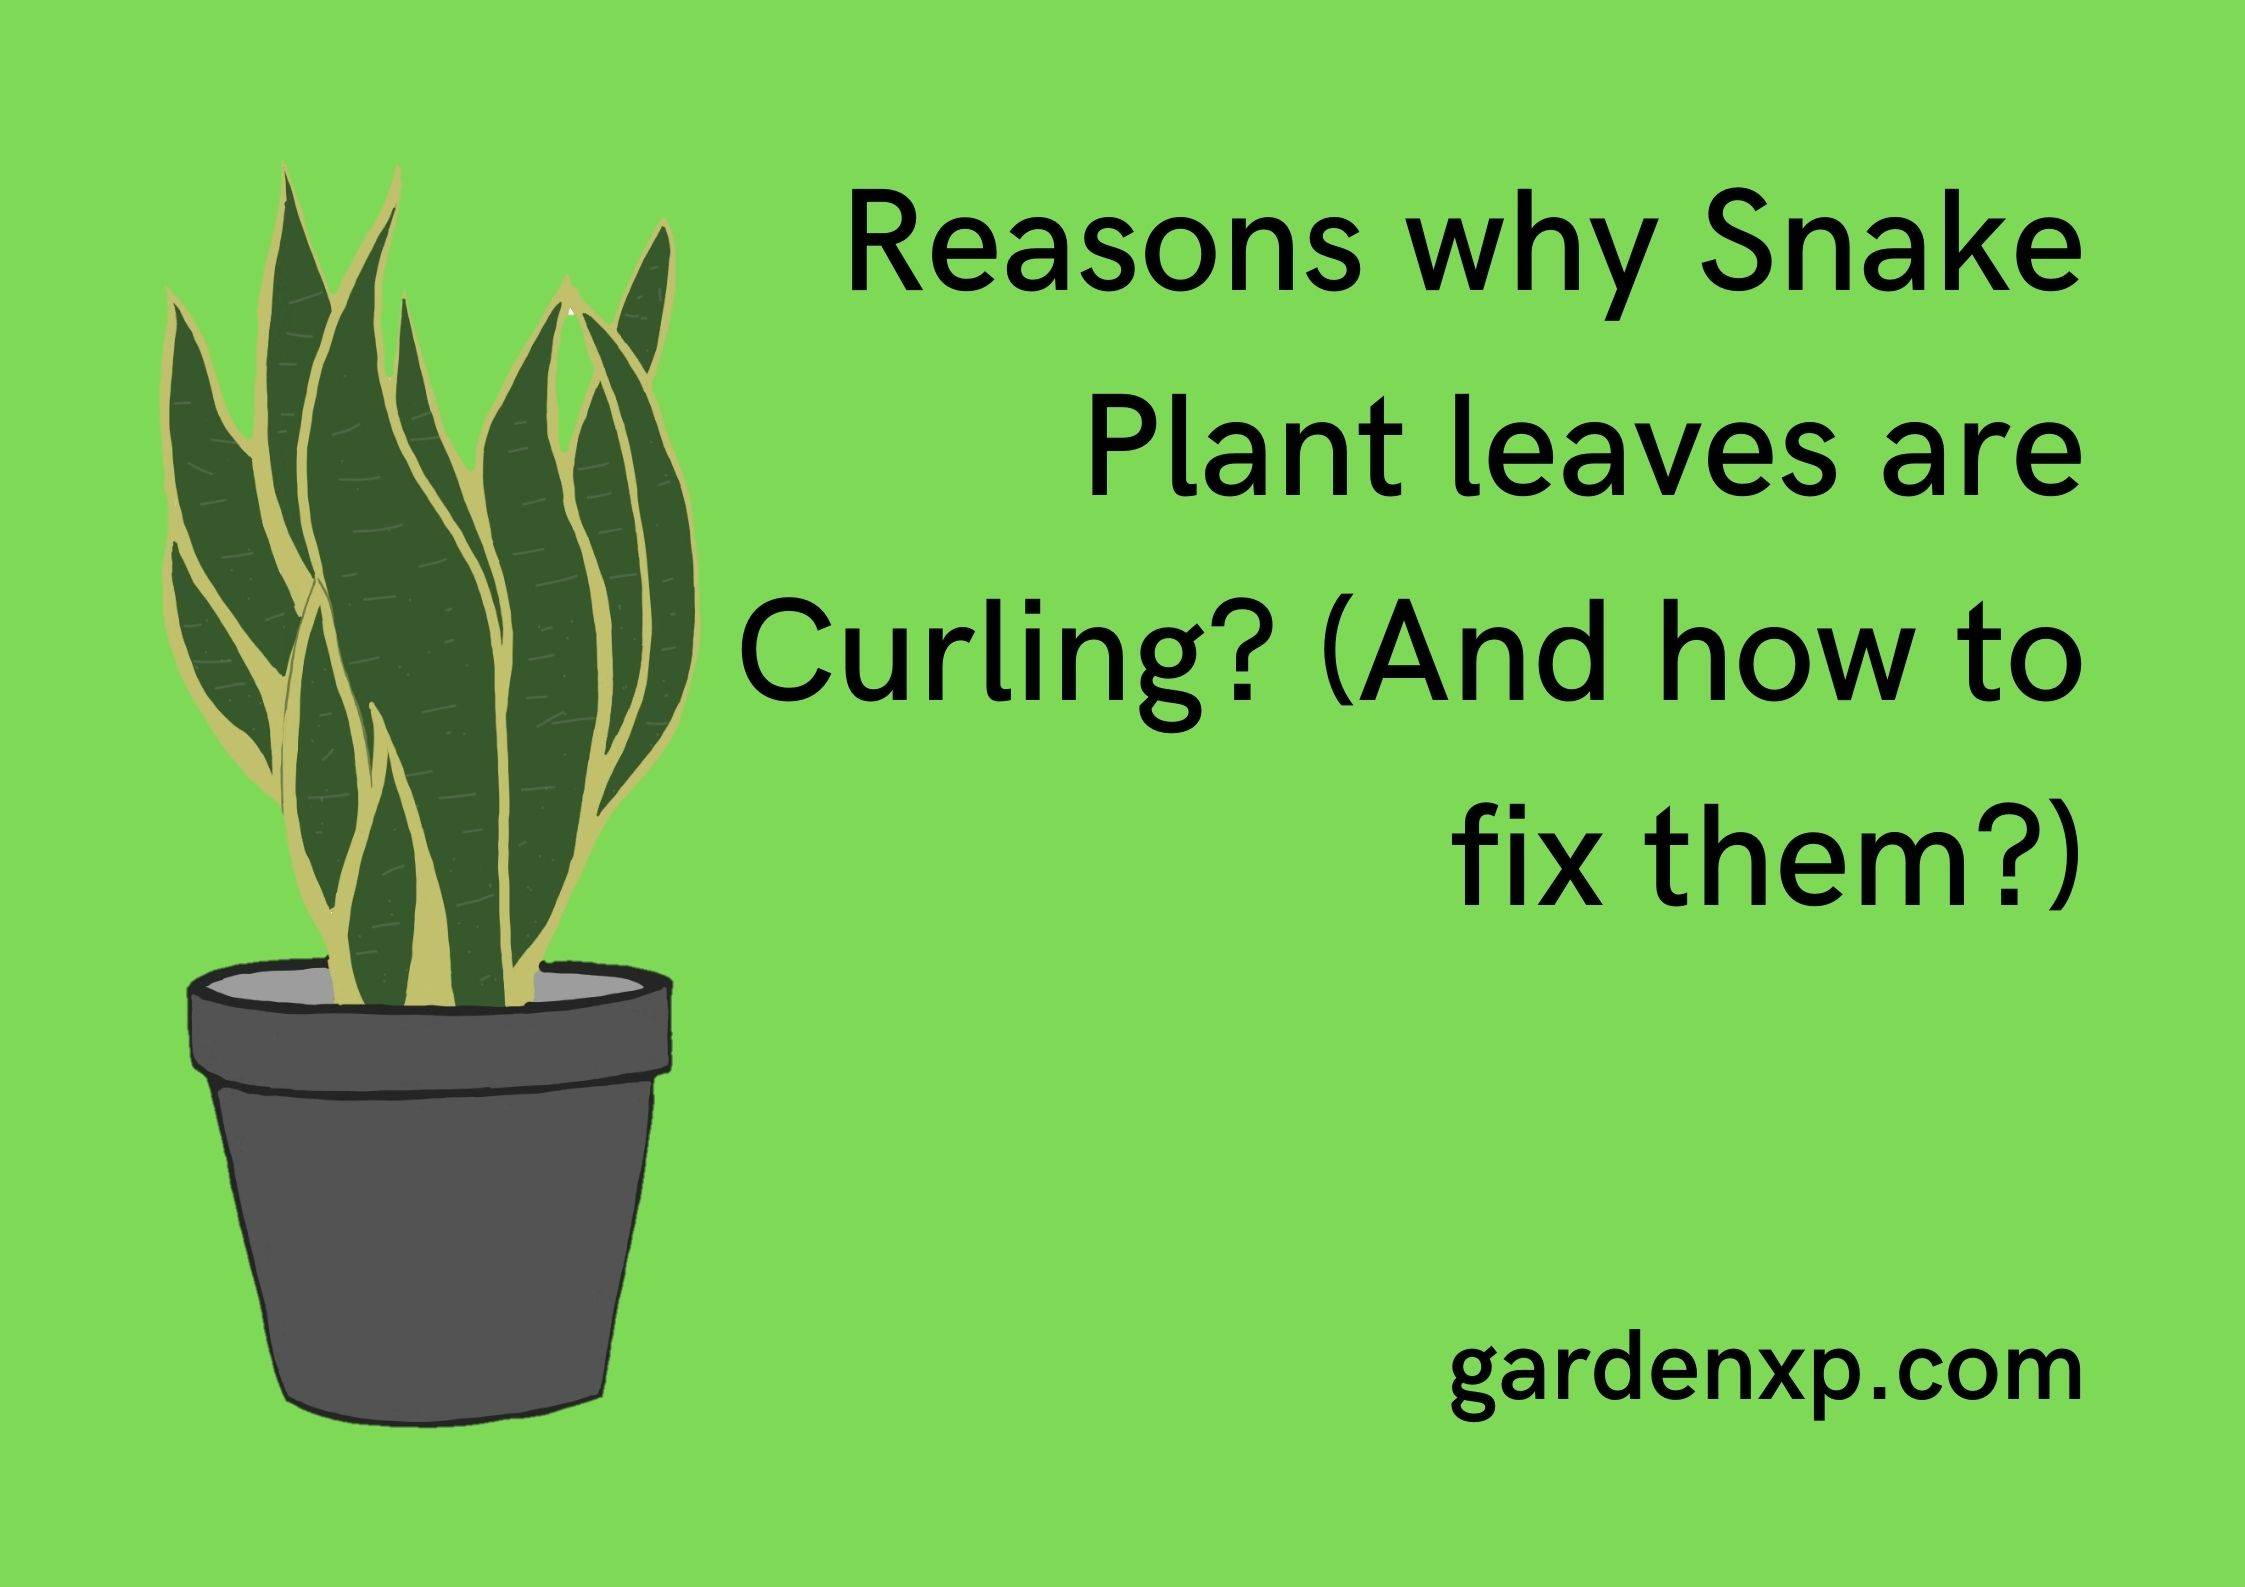 Reasons why Snake Plant leaves are Curling! (And how to fix them?)